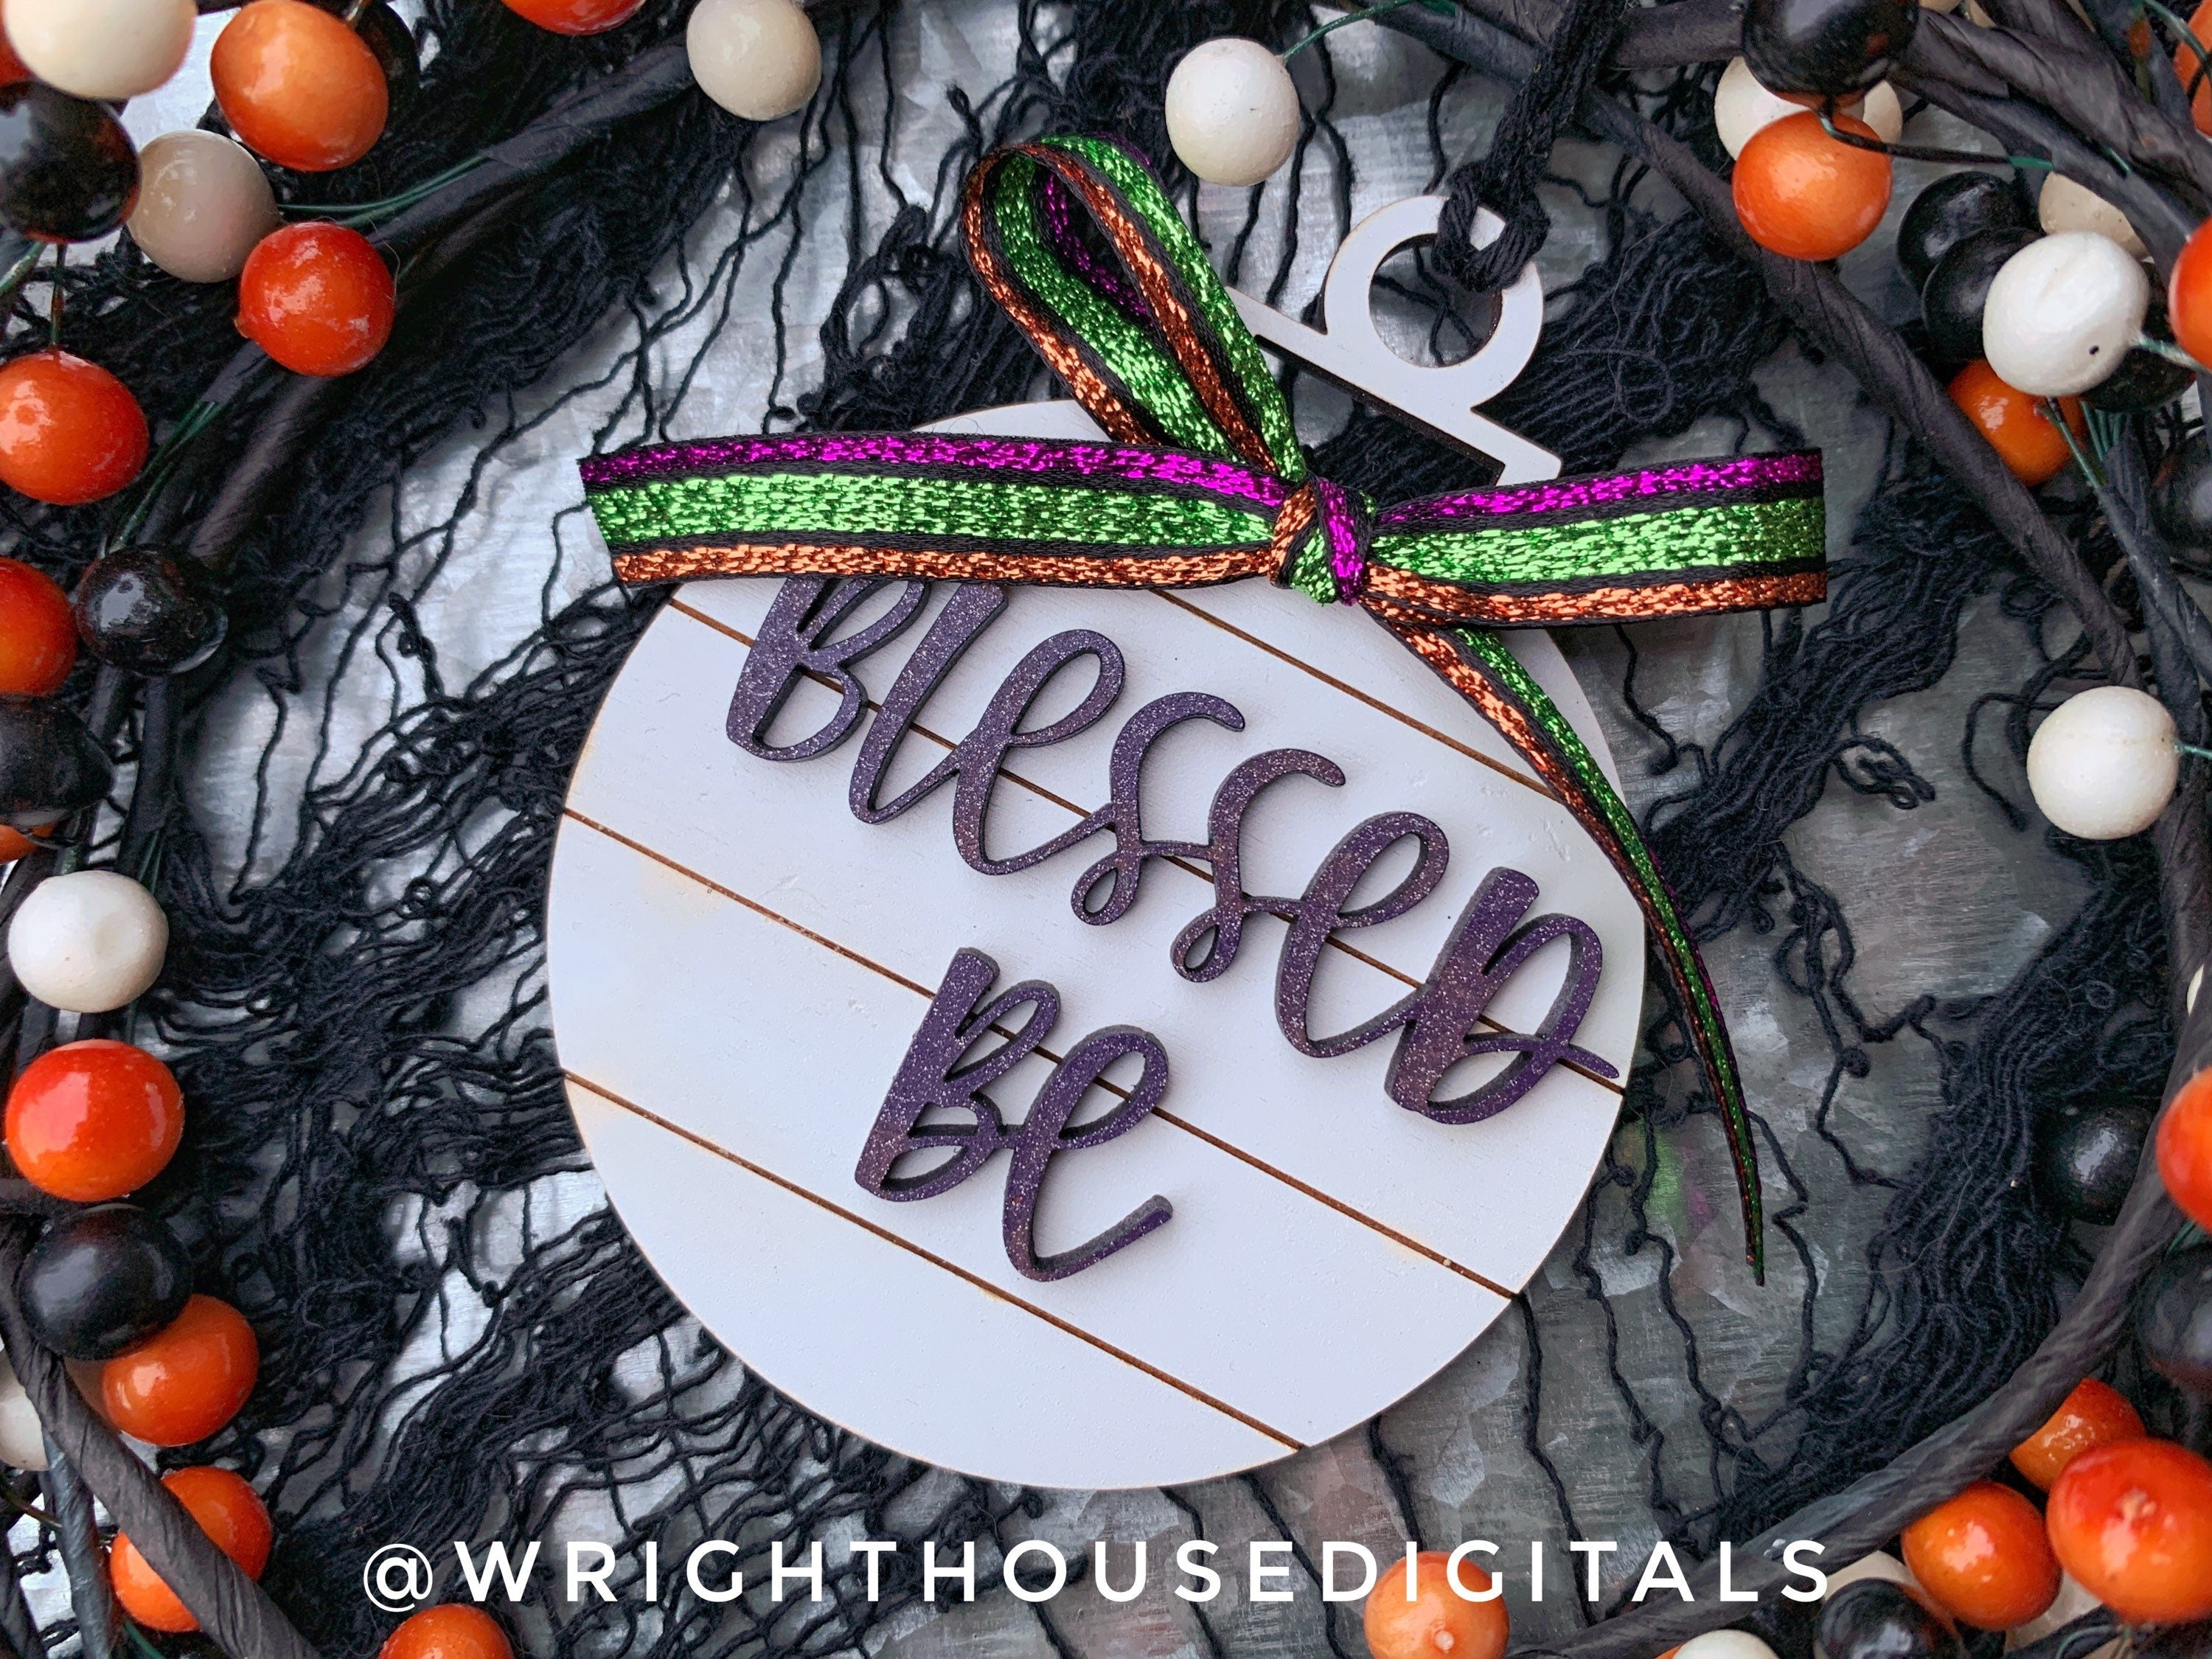 Witchy Halloween Tree Decor - Shiplap Wooden Tree Ornaments - Gothic Fireplace Mantel Accents - Seasonal Tiered Tray and Coffee Bar Decor